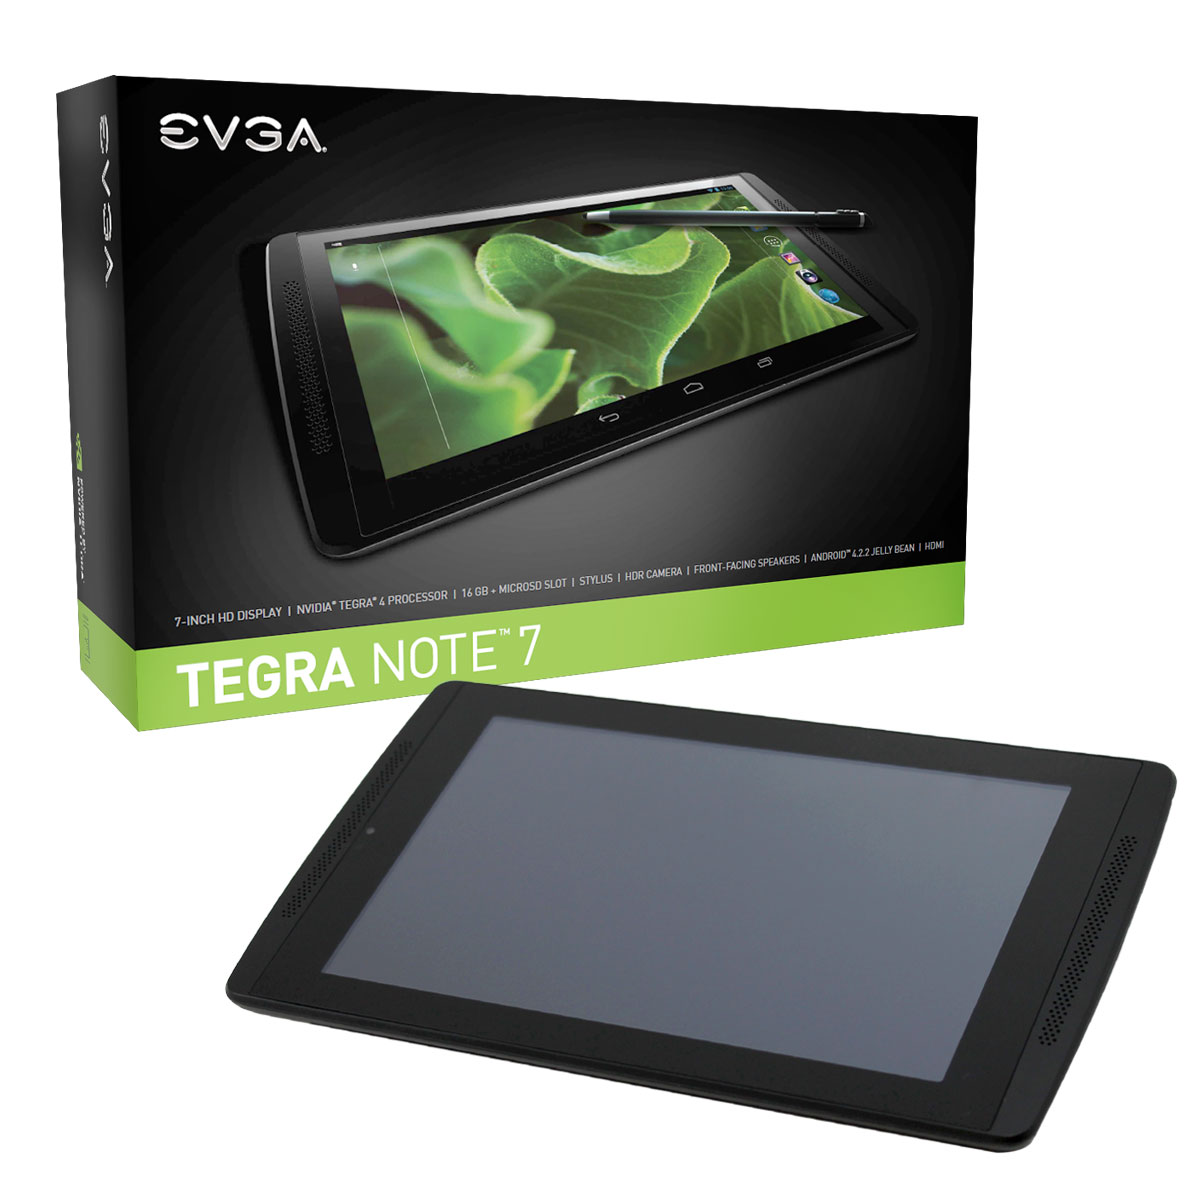 Media asset in full size related to 3dfxzone.it news item entitled as follows: EVGA introduce il tablet Tegra NOTE 7 nel mercato europeo | Image Name: news20970_EVGA-Tegra-NOTE-7_3.jpg